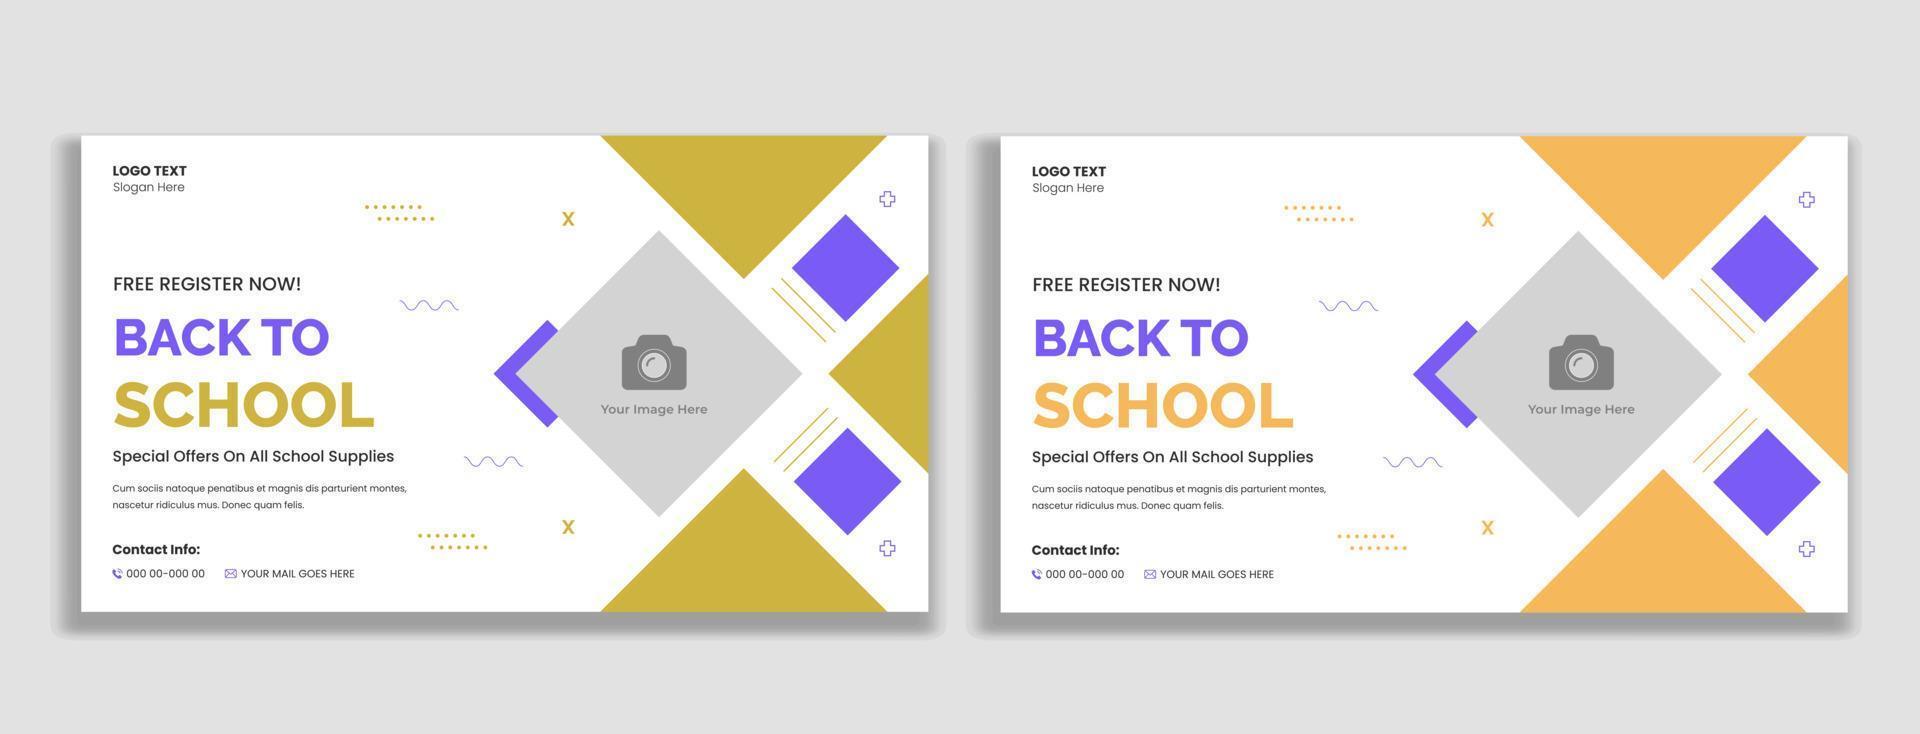 Back To School admission thumbnail and web banner vector